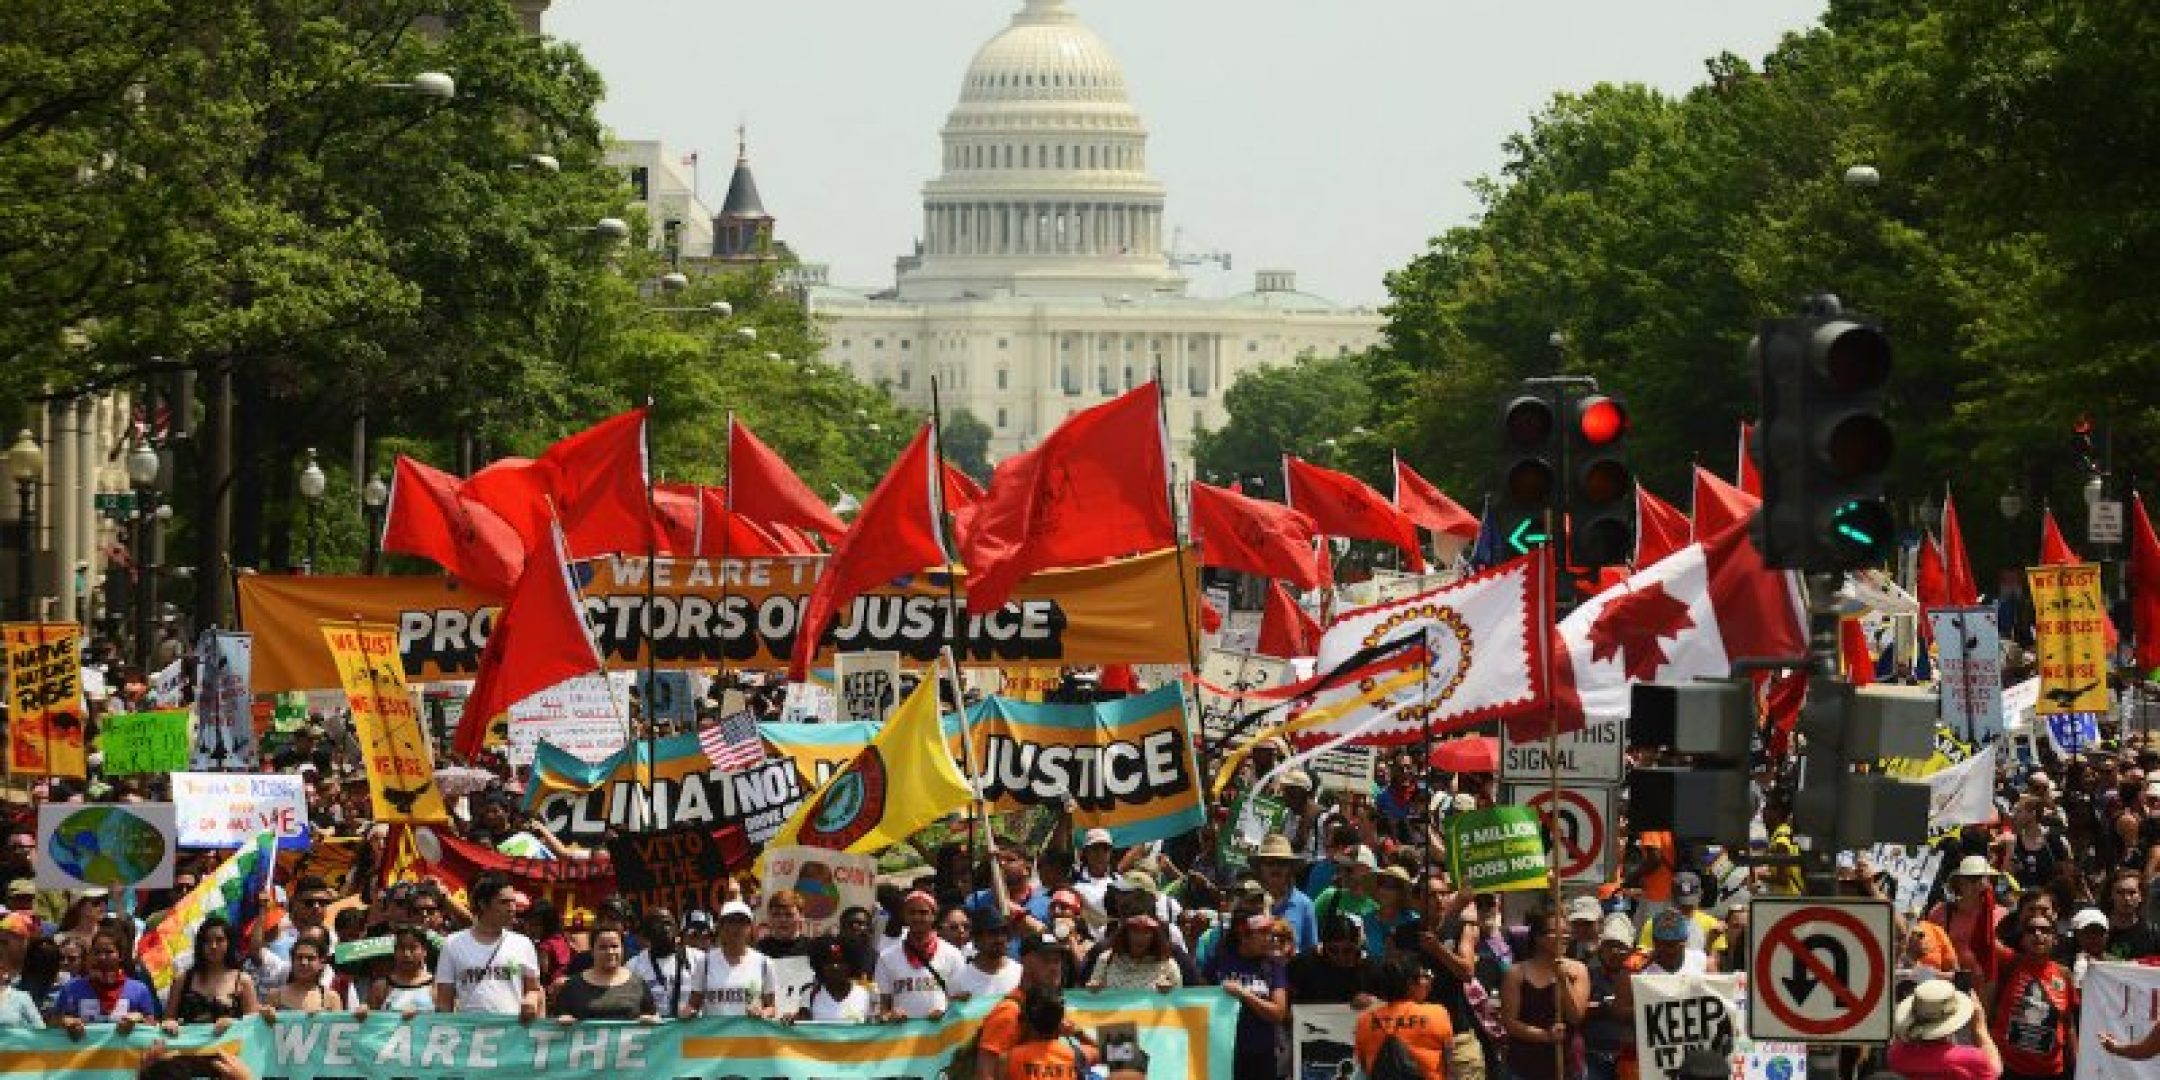 WASHINGTON, DC - APRIL 29:  People march from the U.S. Capitol to the White House for the People's Climate Movement to protest President Donald Trump's enviromental policies April 29, 2017 in Washington, DC. Demonstrators across the country are gathering to demand  a clean energy economy. (Photo by Astrid Riecken/Getty Images)